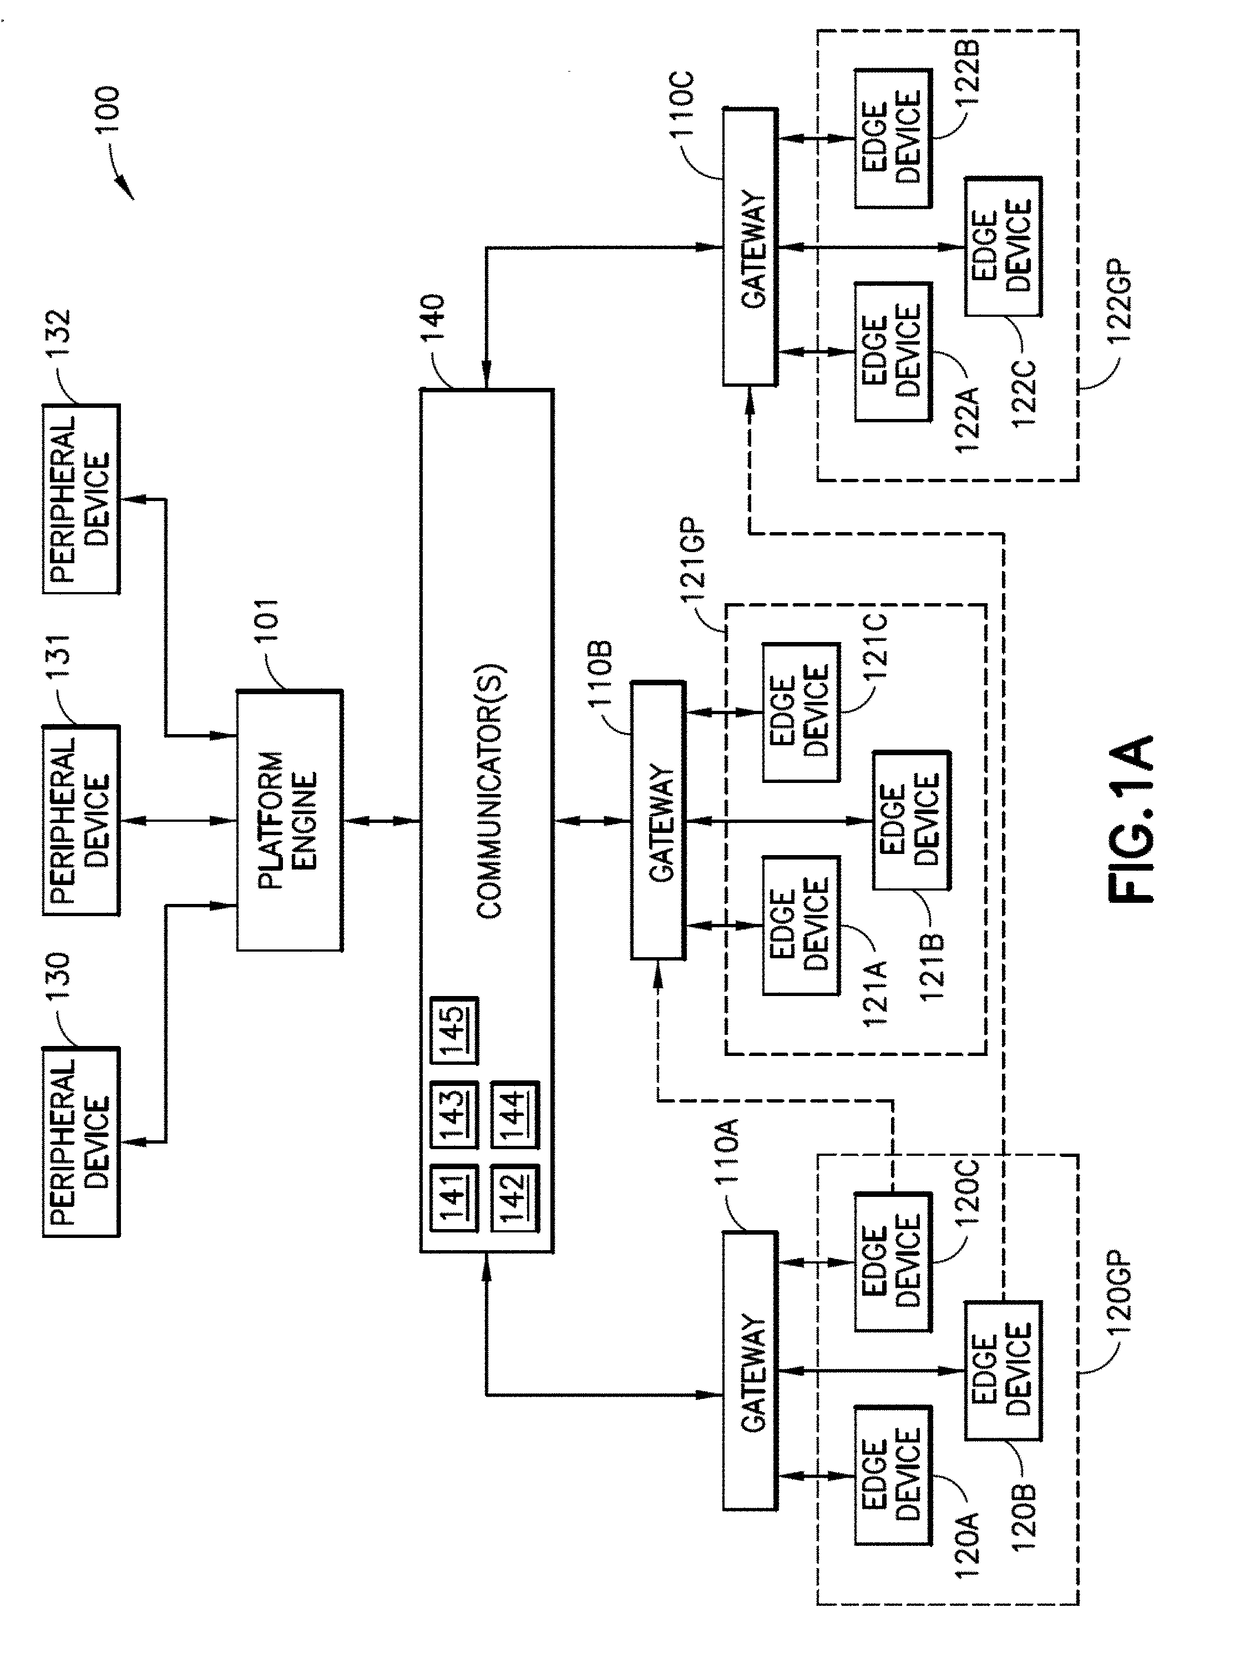 System for distributed intelligent remote sensing systems